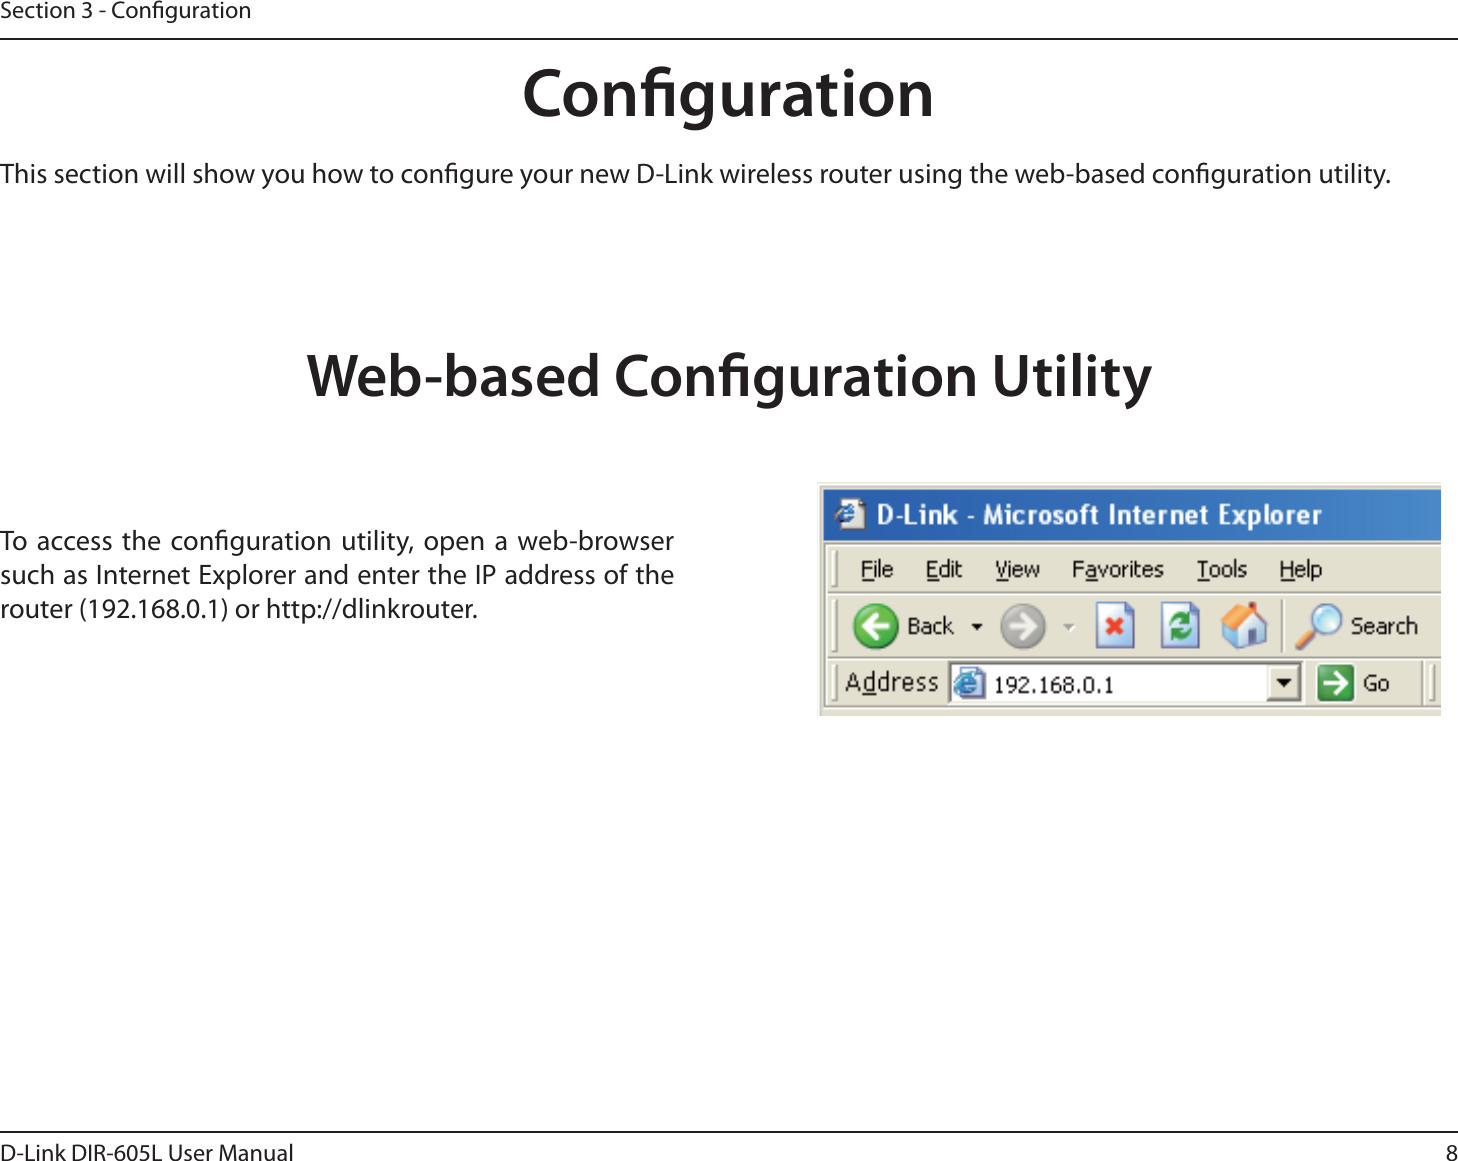 8D-Link DIR-605L User ManualSection 3 - CongurationCongurationThis section will show you how to congure your new D-Link wireless router using the web-based conguration utility.Web-based Conguration UtilityTo access the conguration utility, open a web-browser such as Internet Explorer and enter the IP address of the router (192.168.0.1) or http://dlinkrouter.